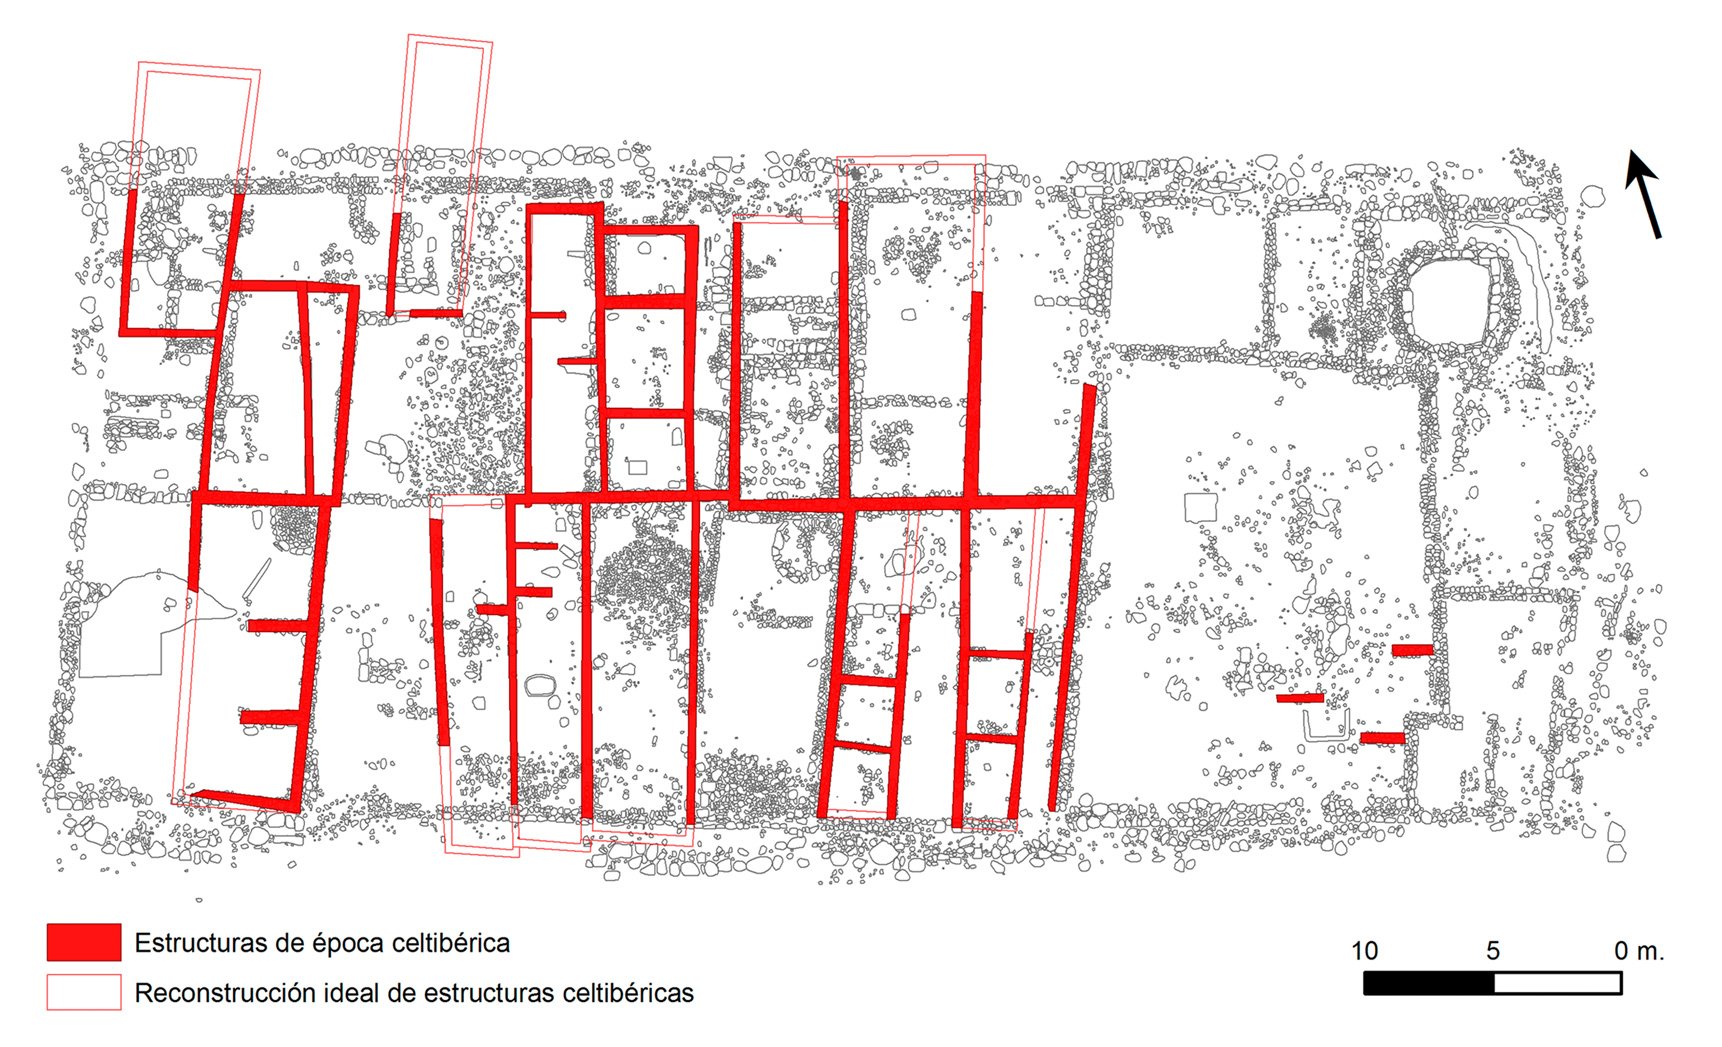 Block XXIII with the houses of the 133 BCE Celtiberian level with the singular Numantine ceramics